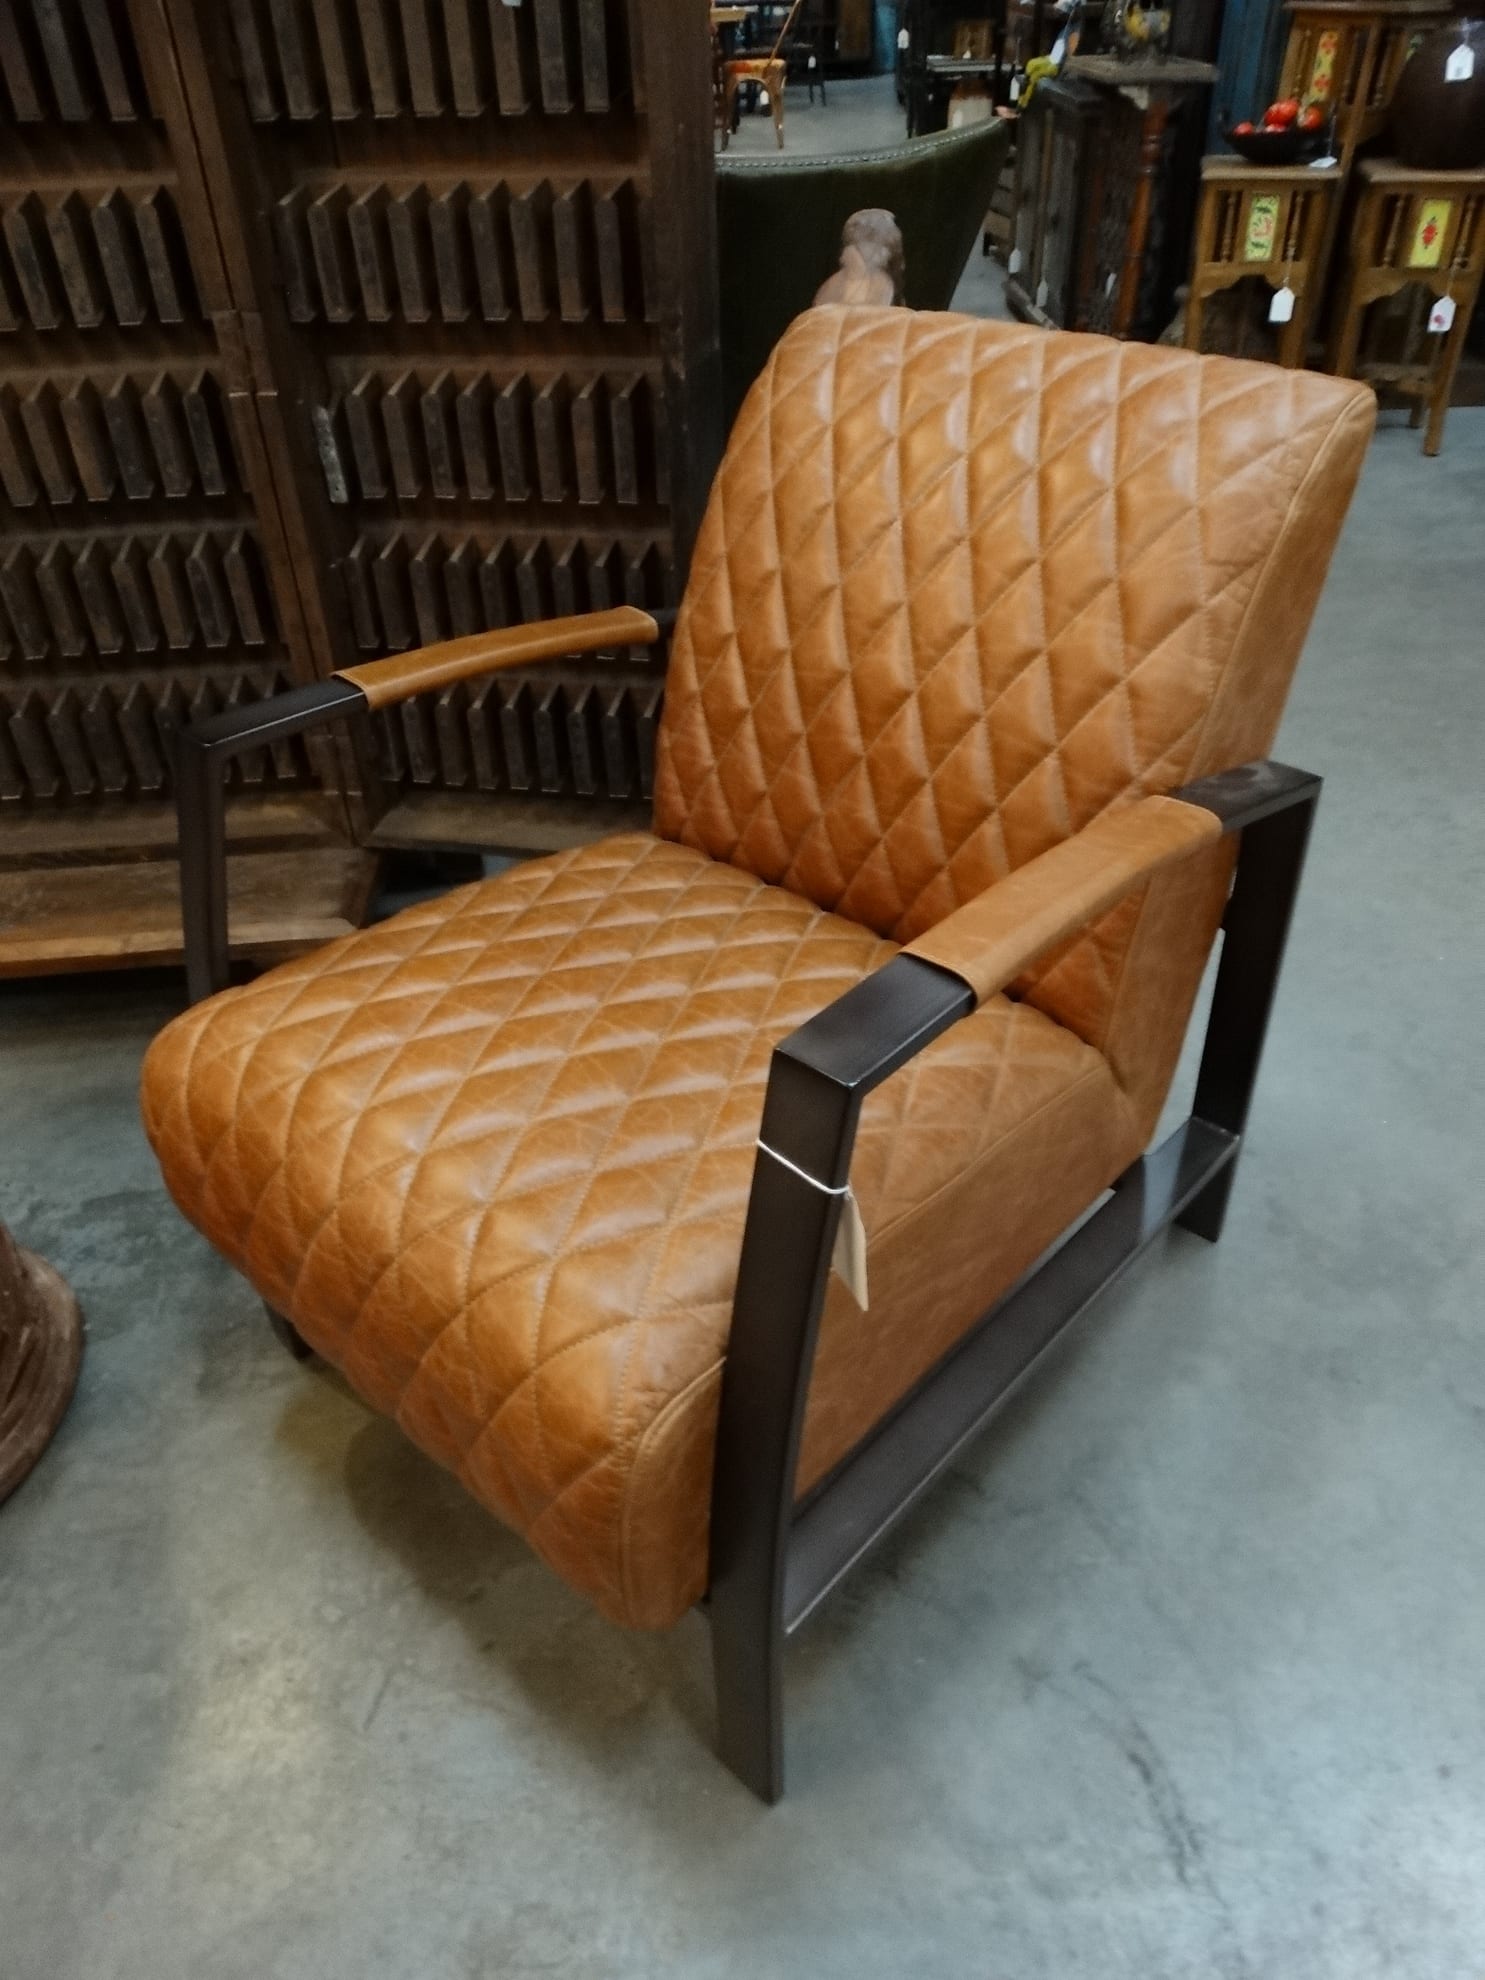 Elegant Leather Arm Chair has a traditional classic flair.